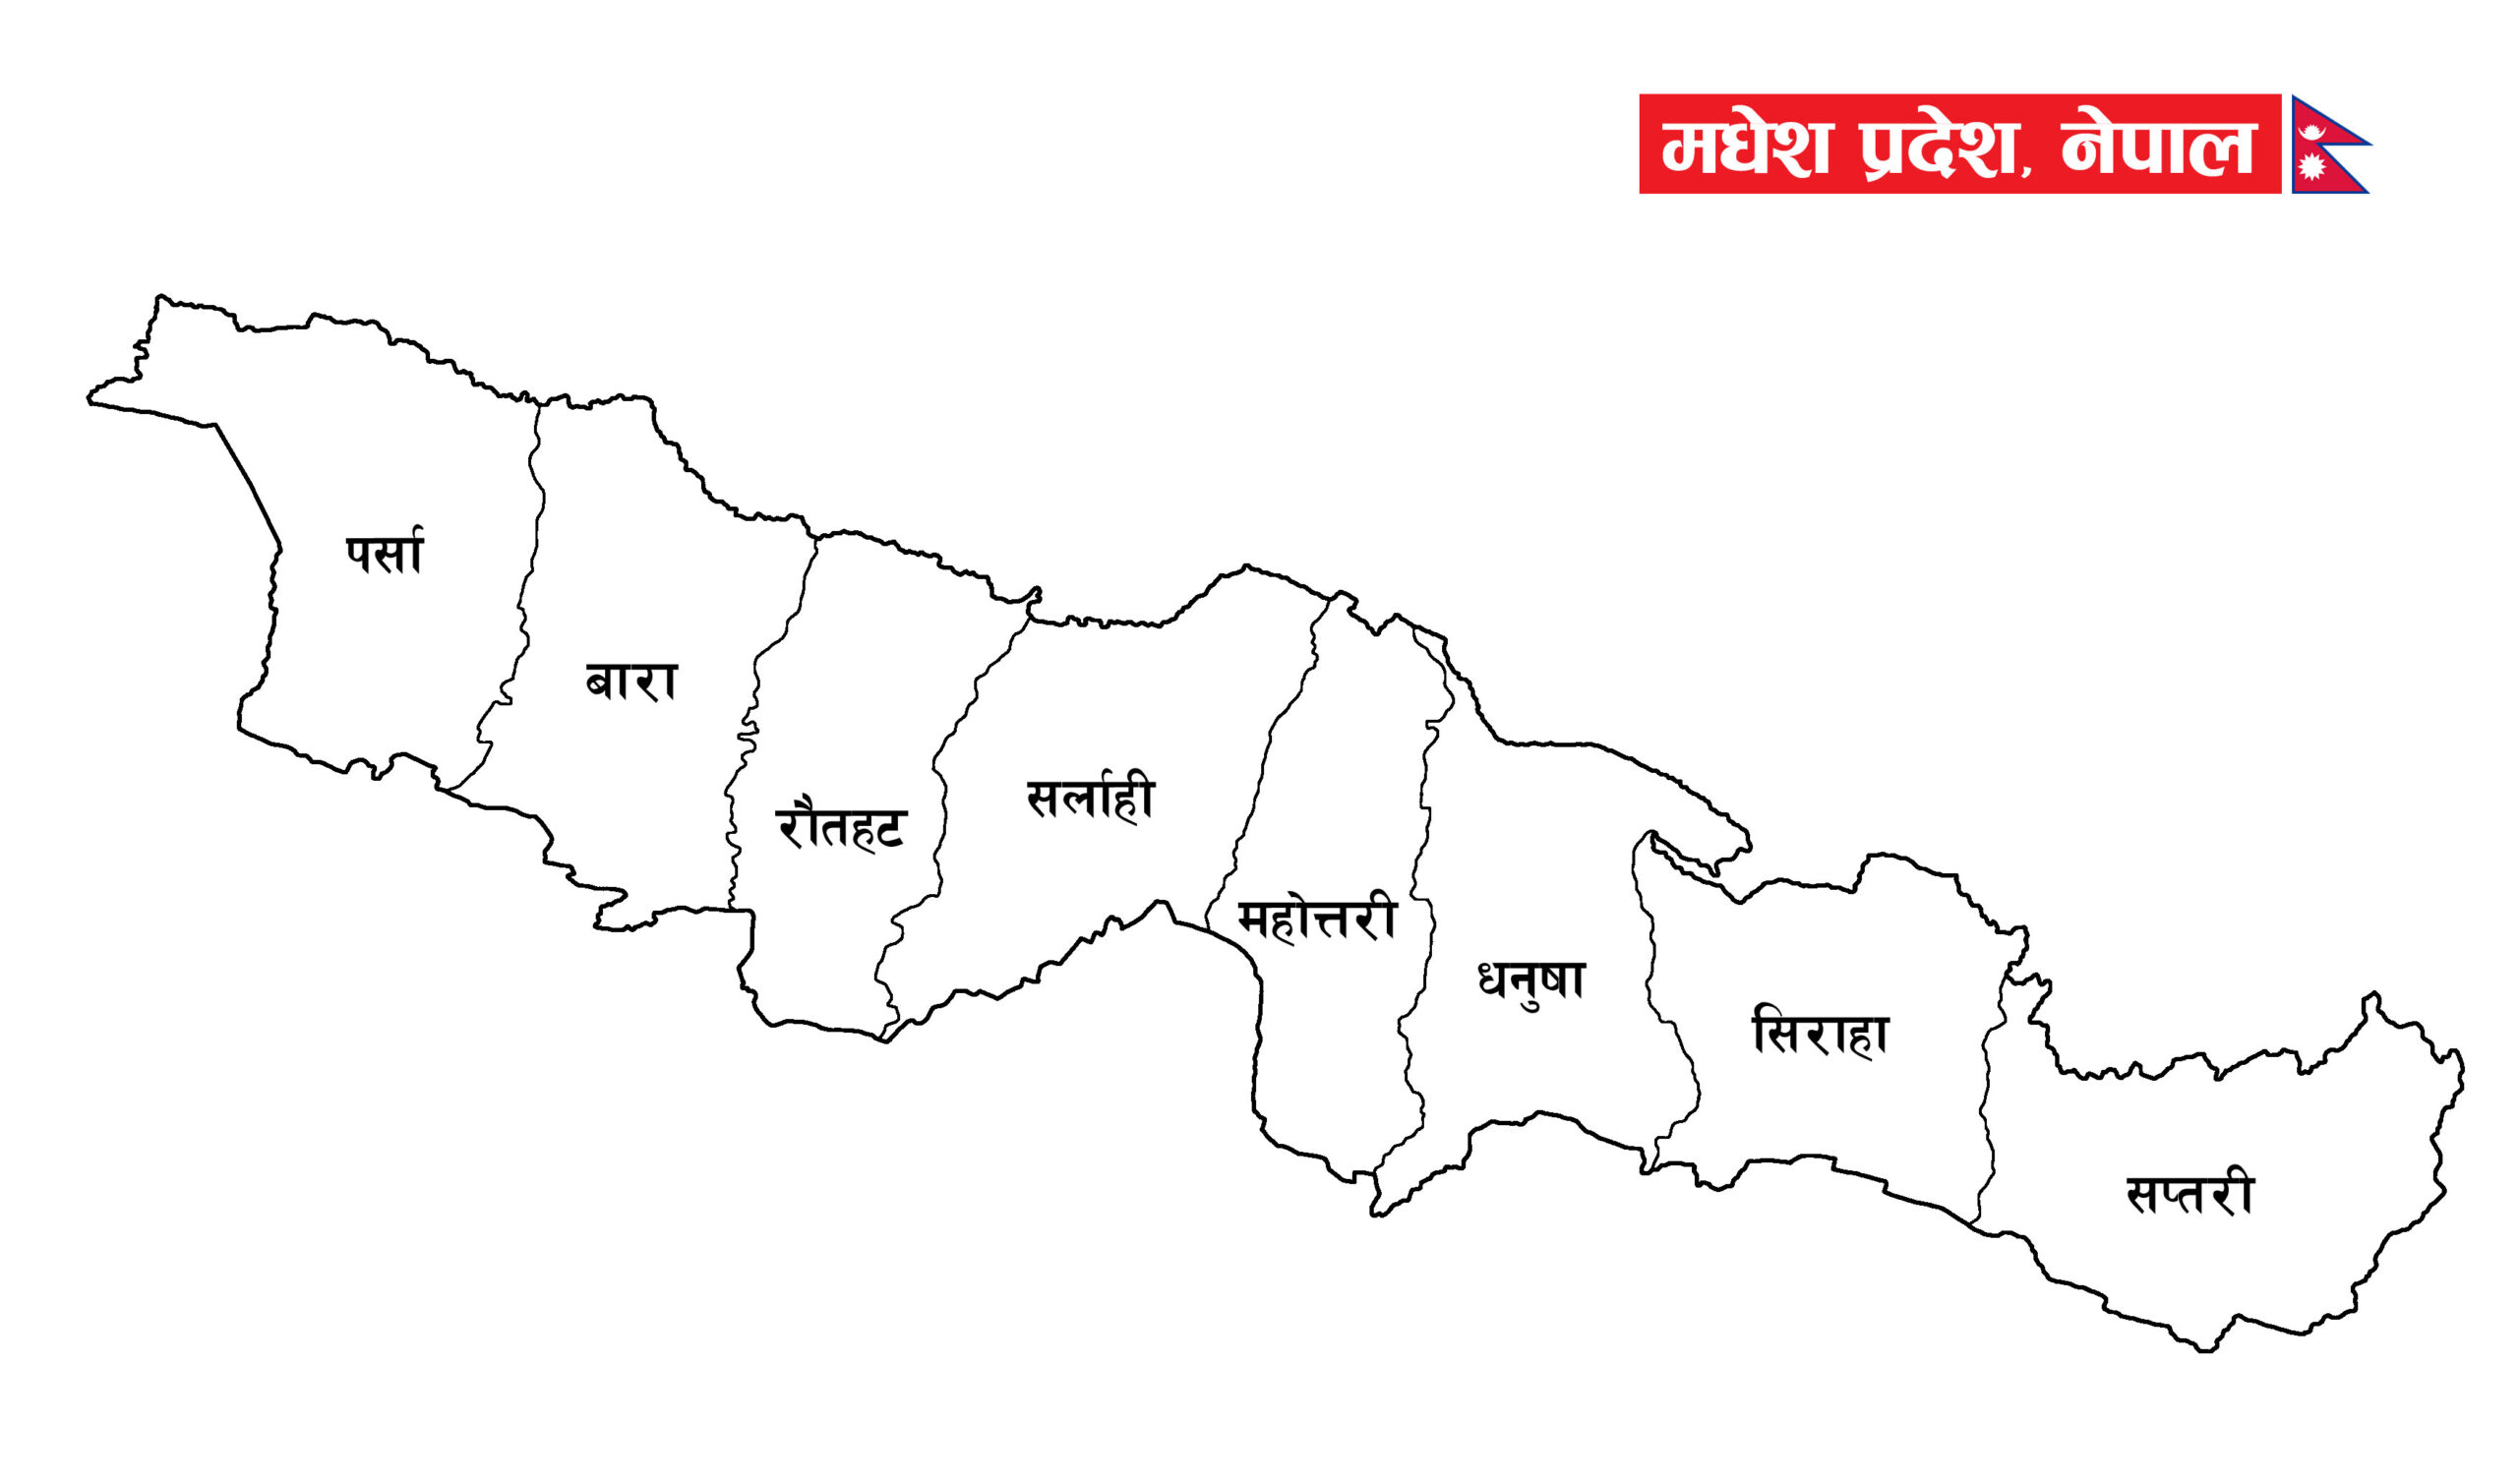 Outline Map of Madhesh Province Nepal